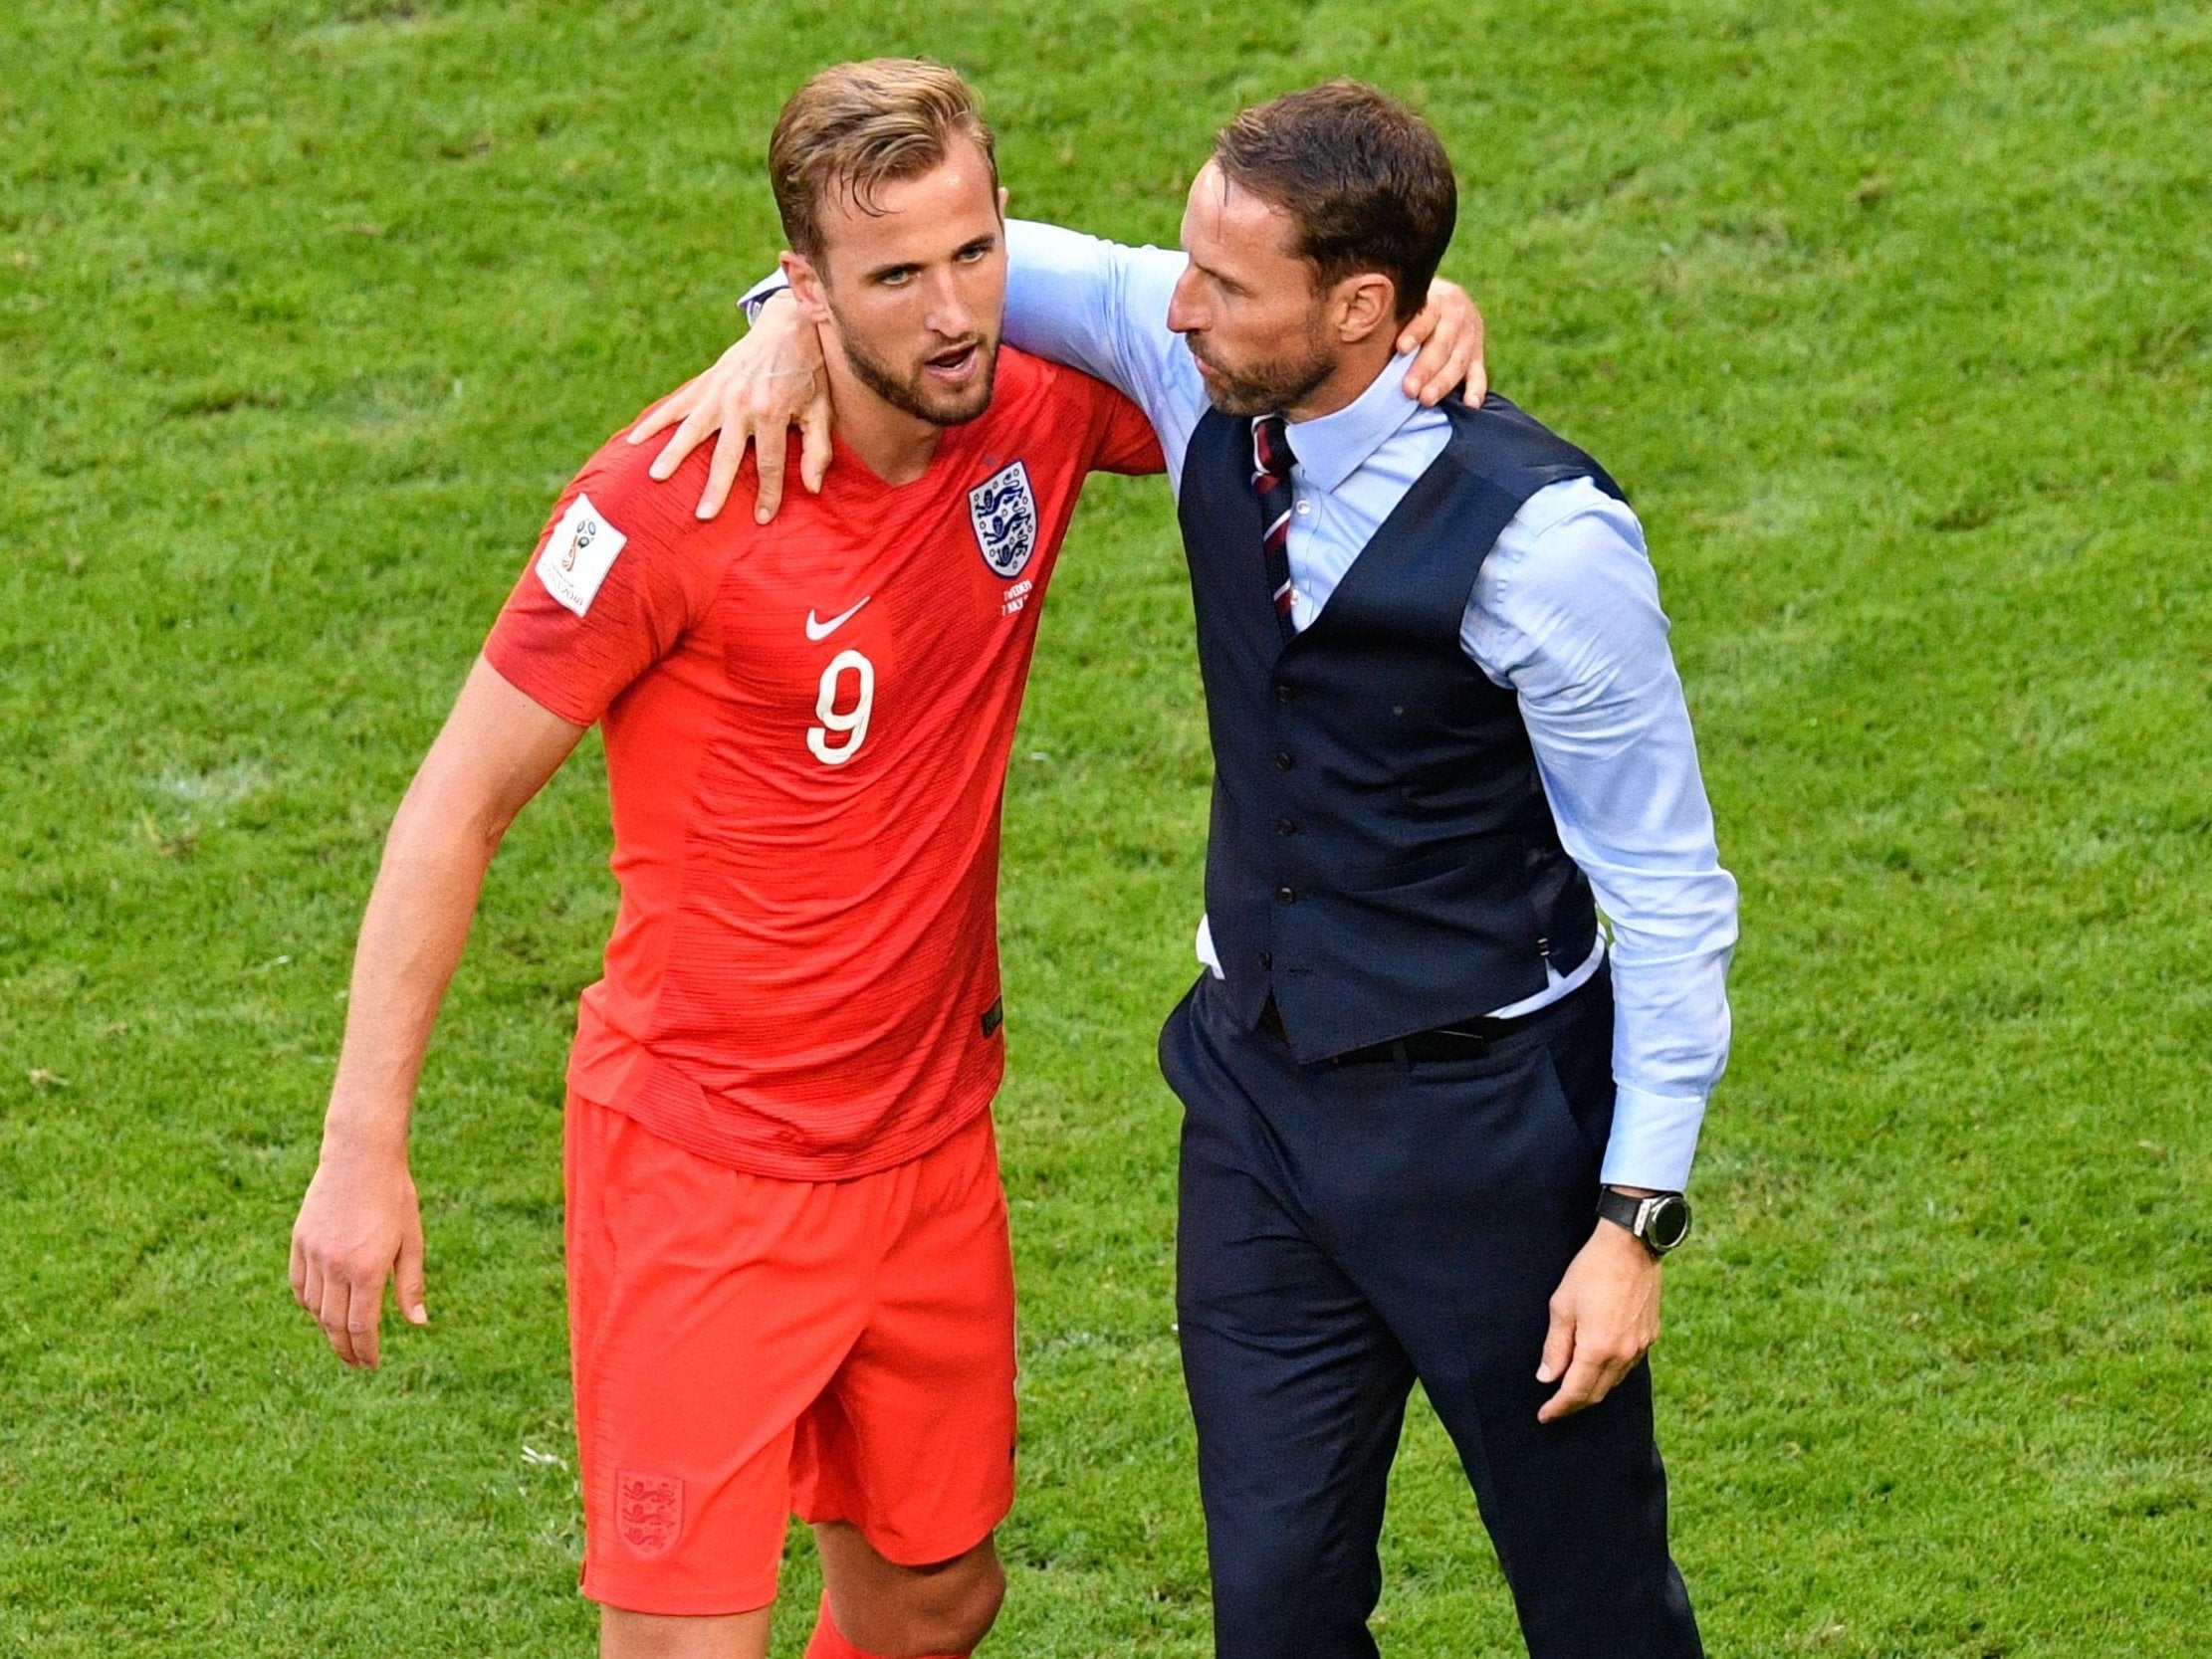 Perhaps Gareth Southgate or Harry Kane would consider a job at Whitehall after the World Cup?